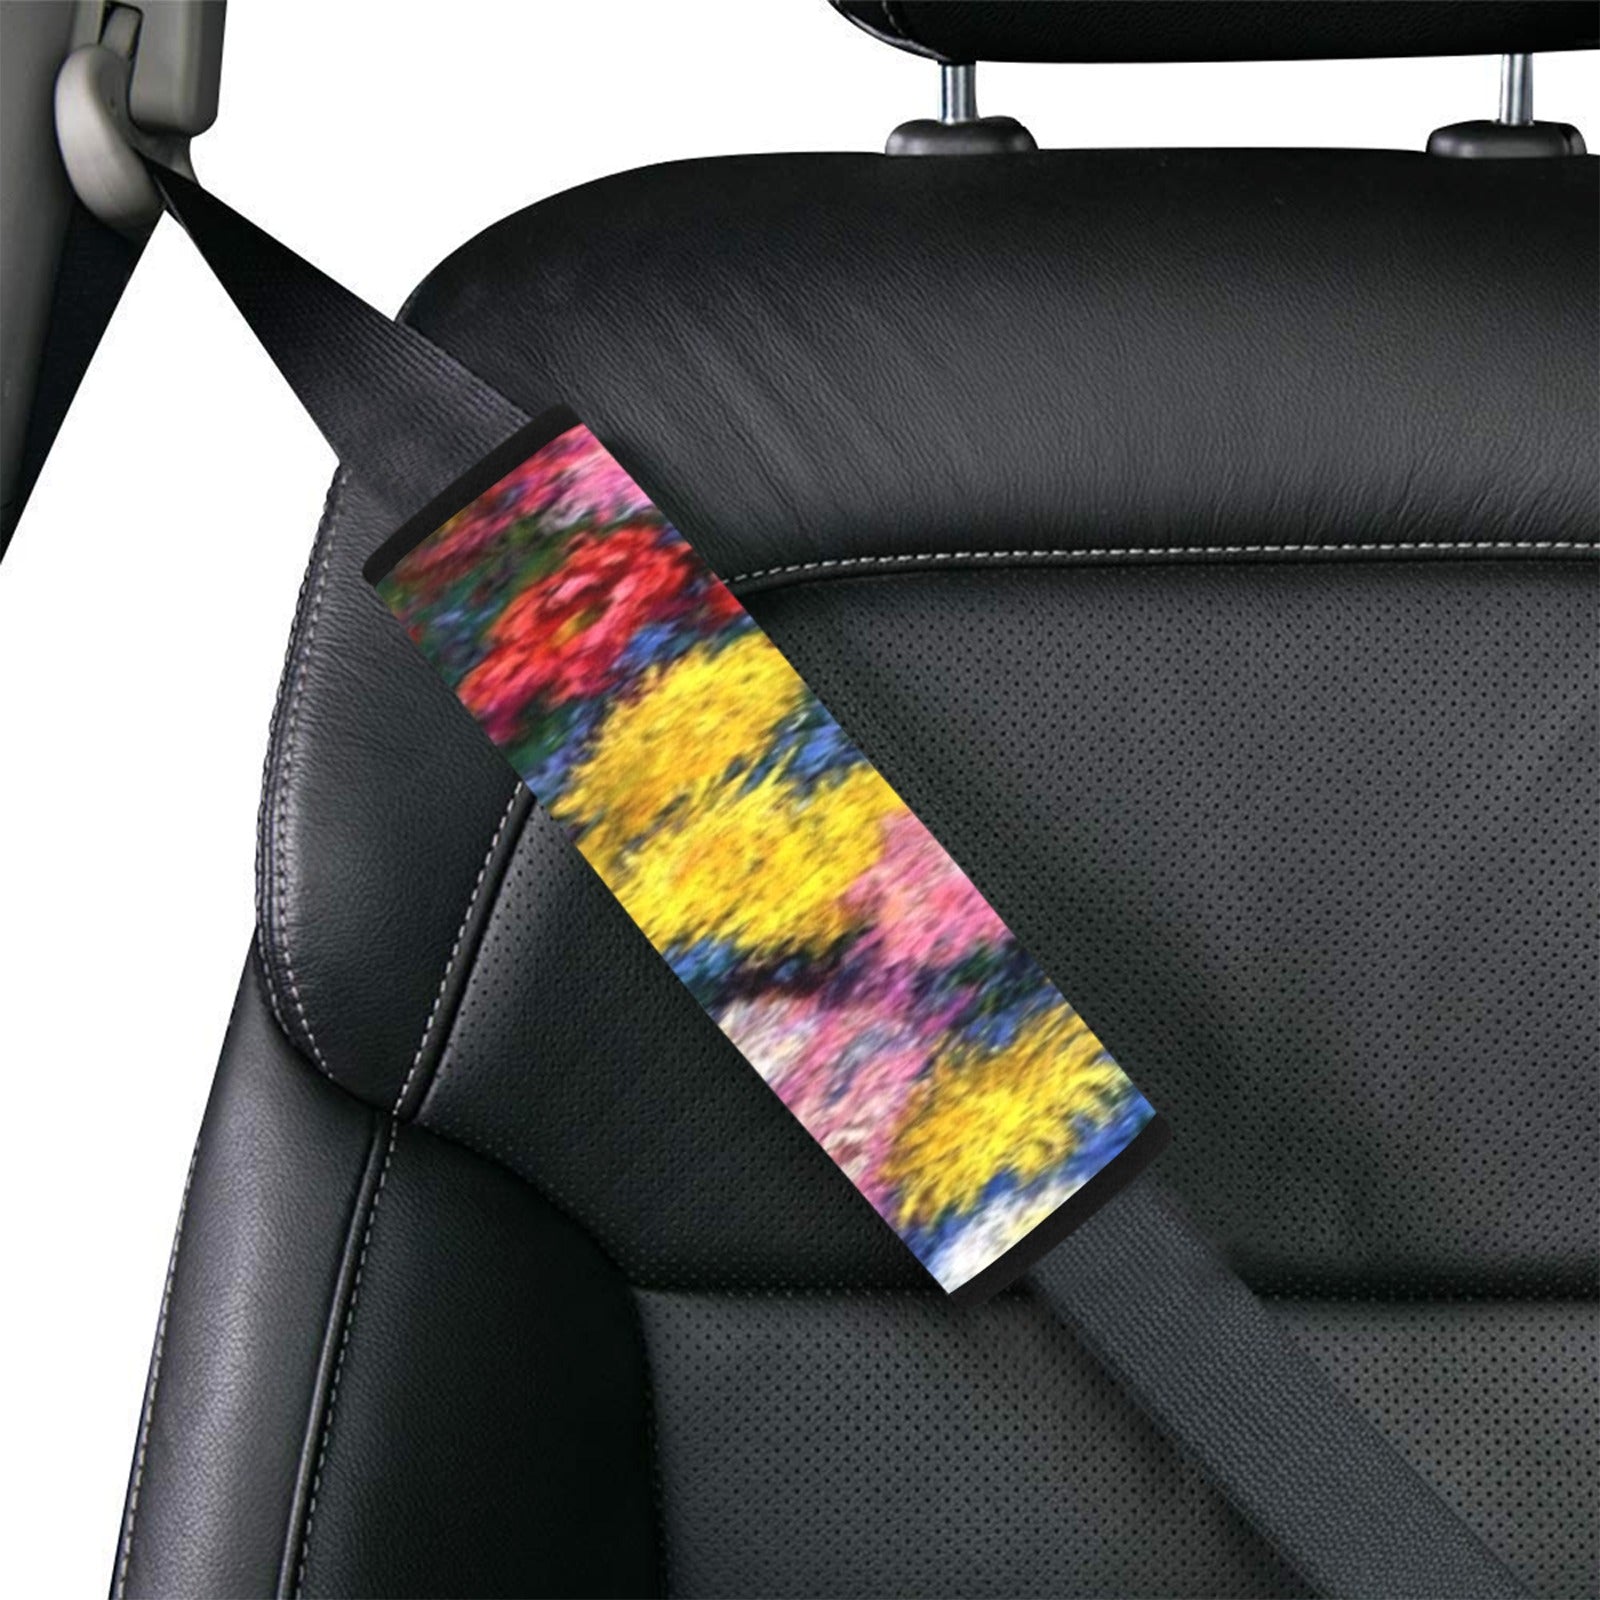 Monet's Carnations Car Seat Belt Small Cover 7" x 8.5"